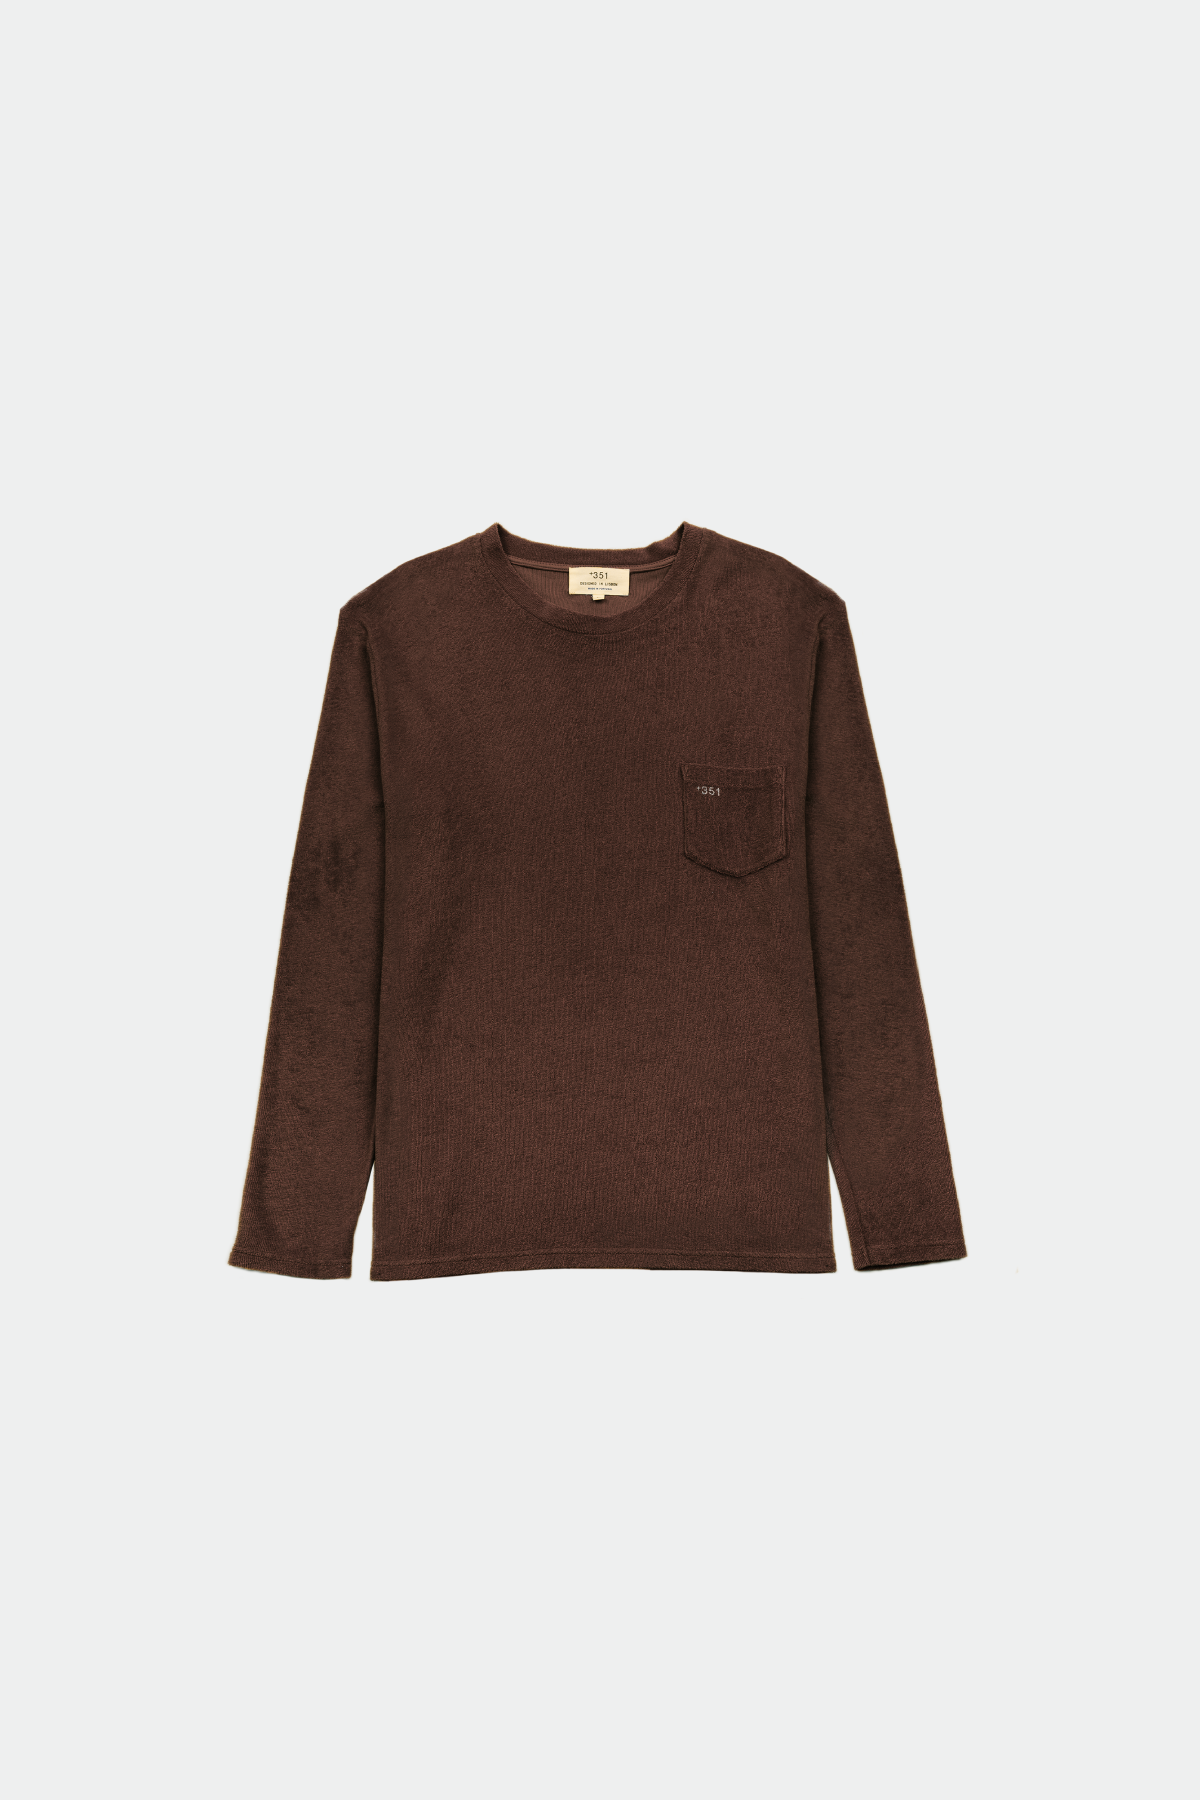 LONG SLEEVE TERRY EXPRESSO